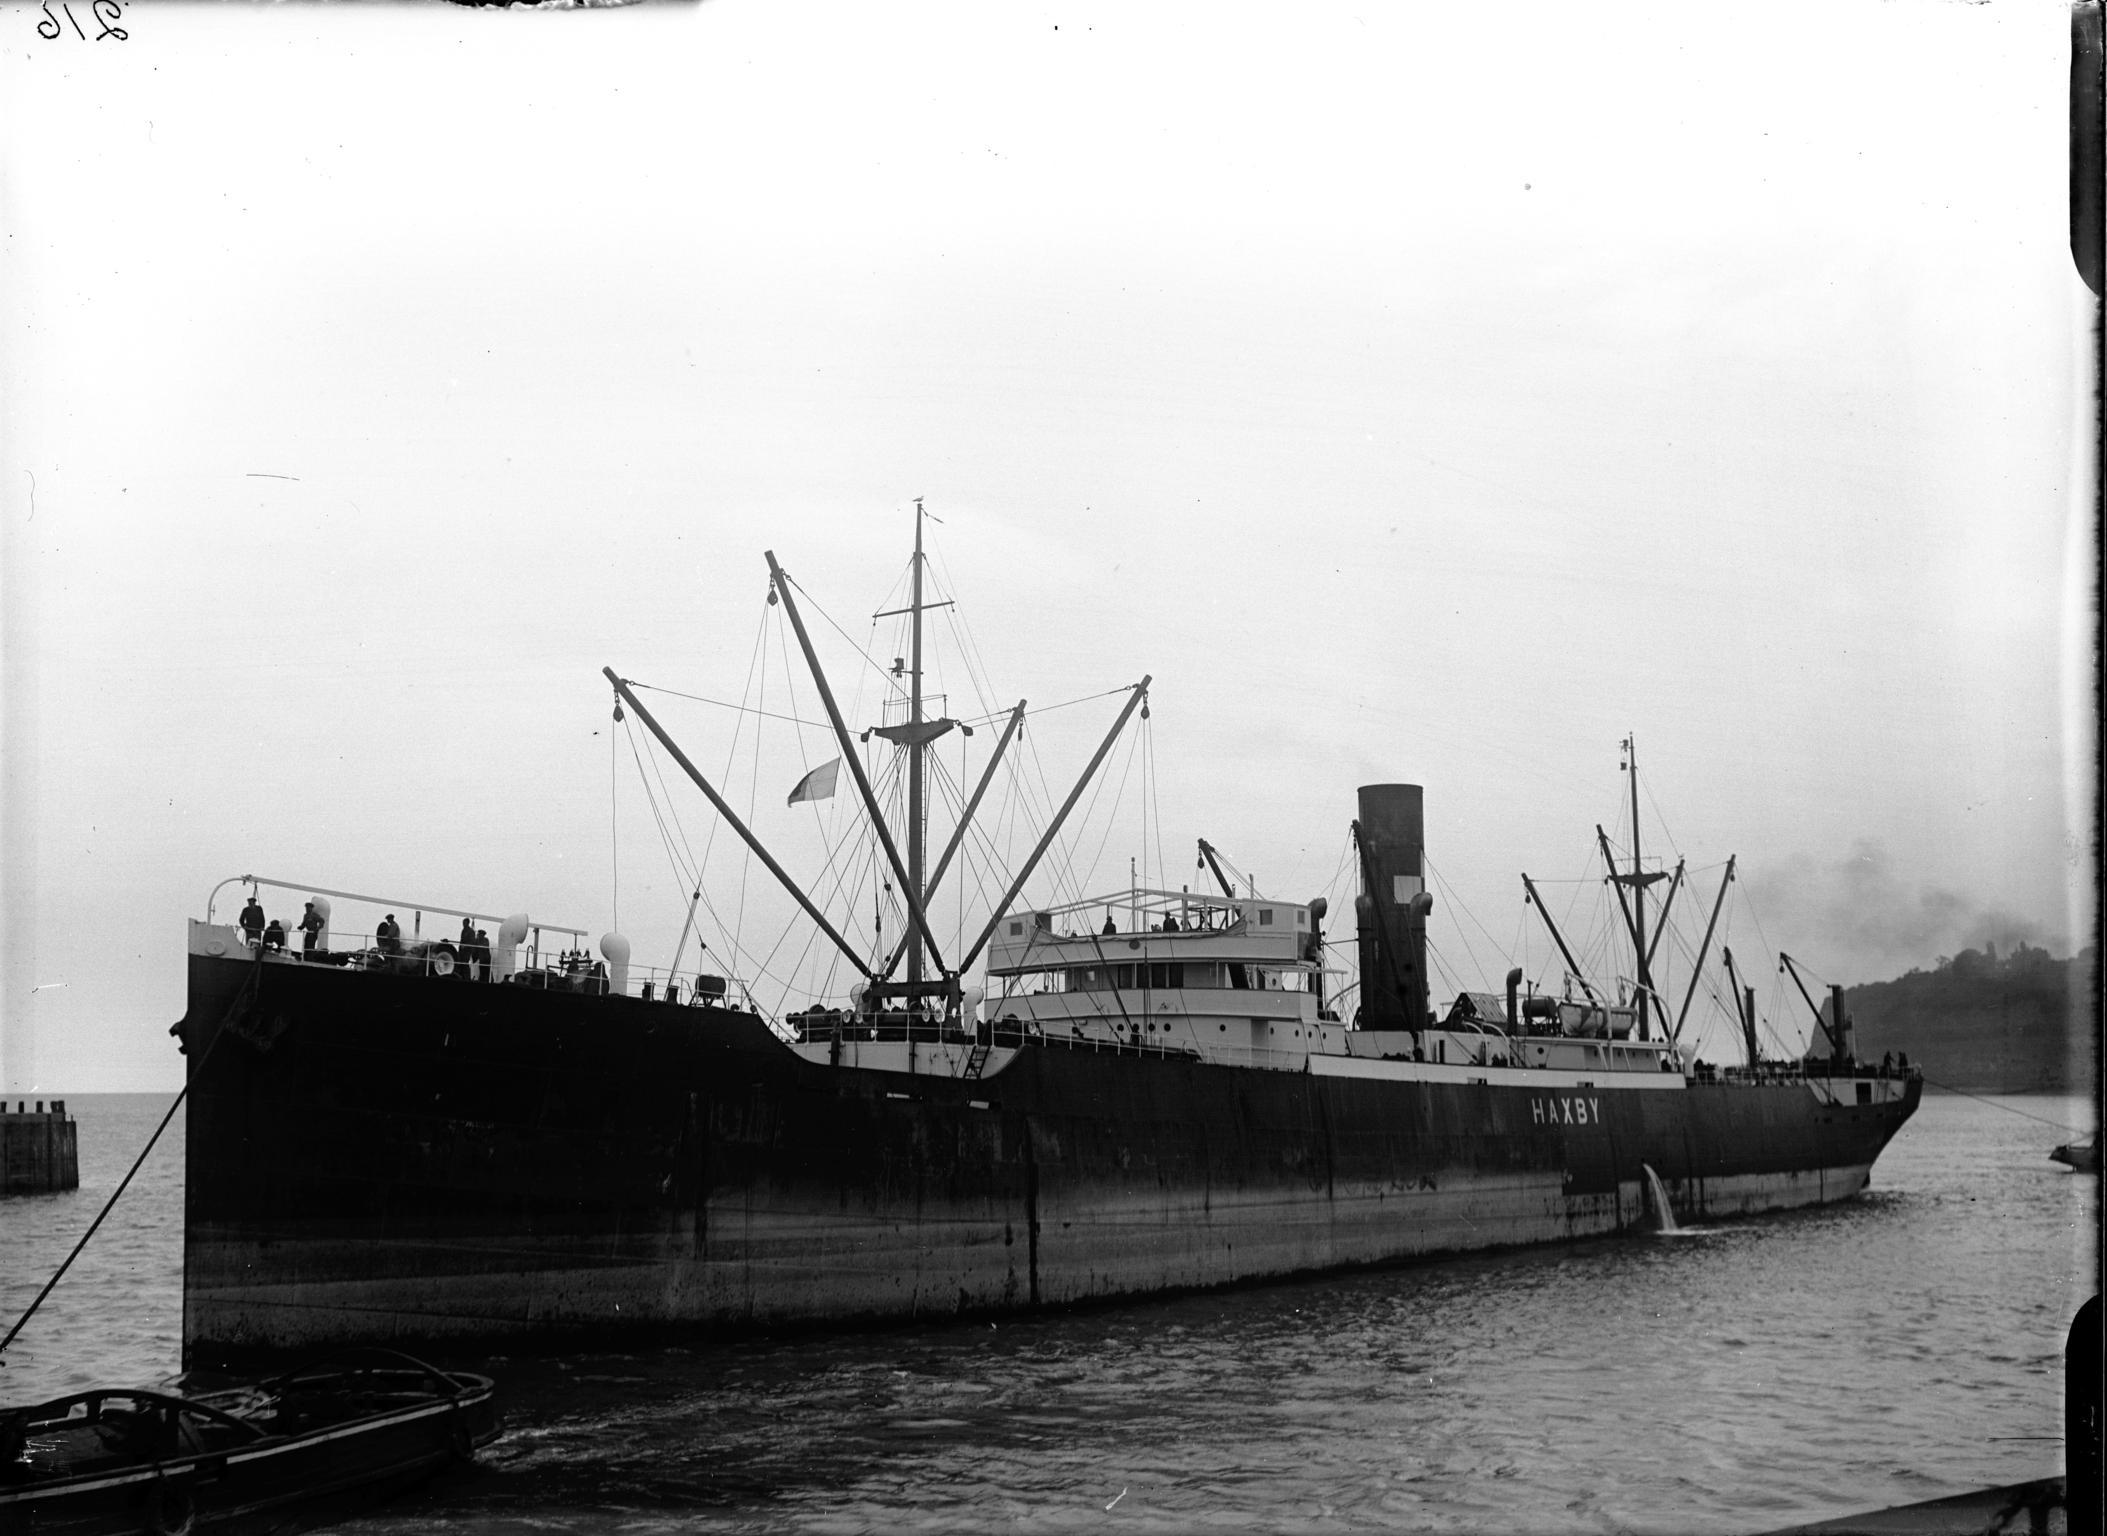 S.S. HAXBY, glass negative